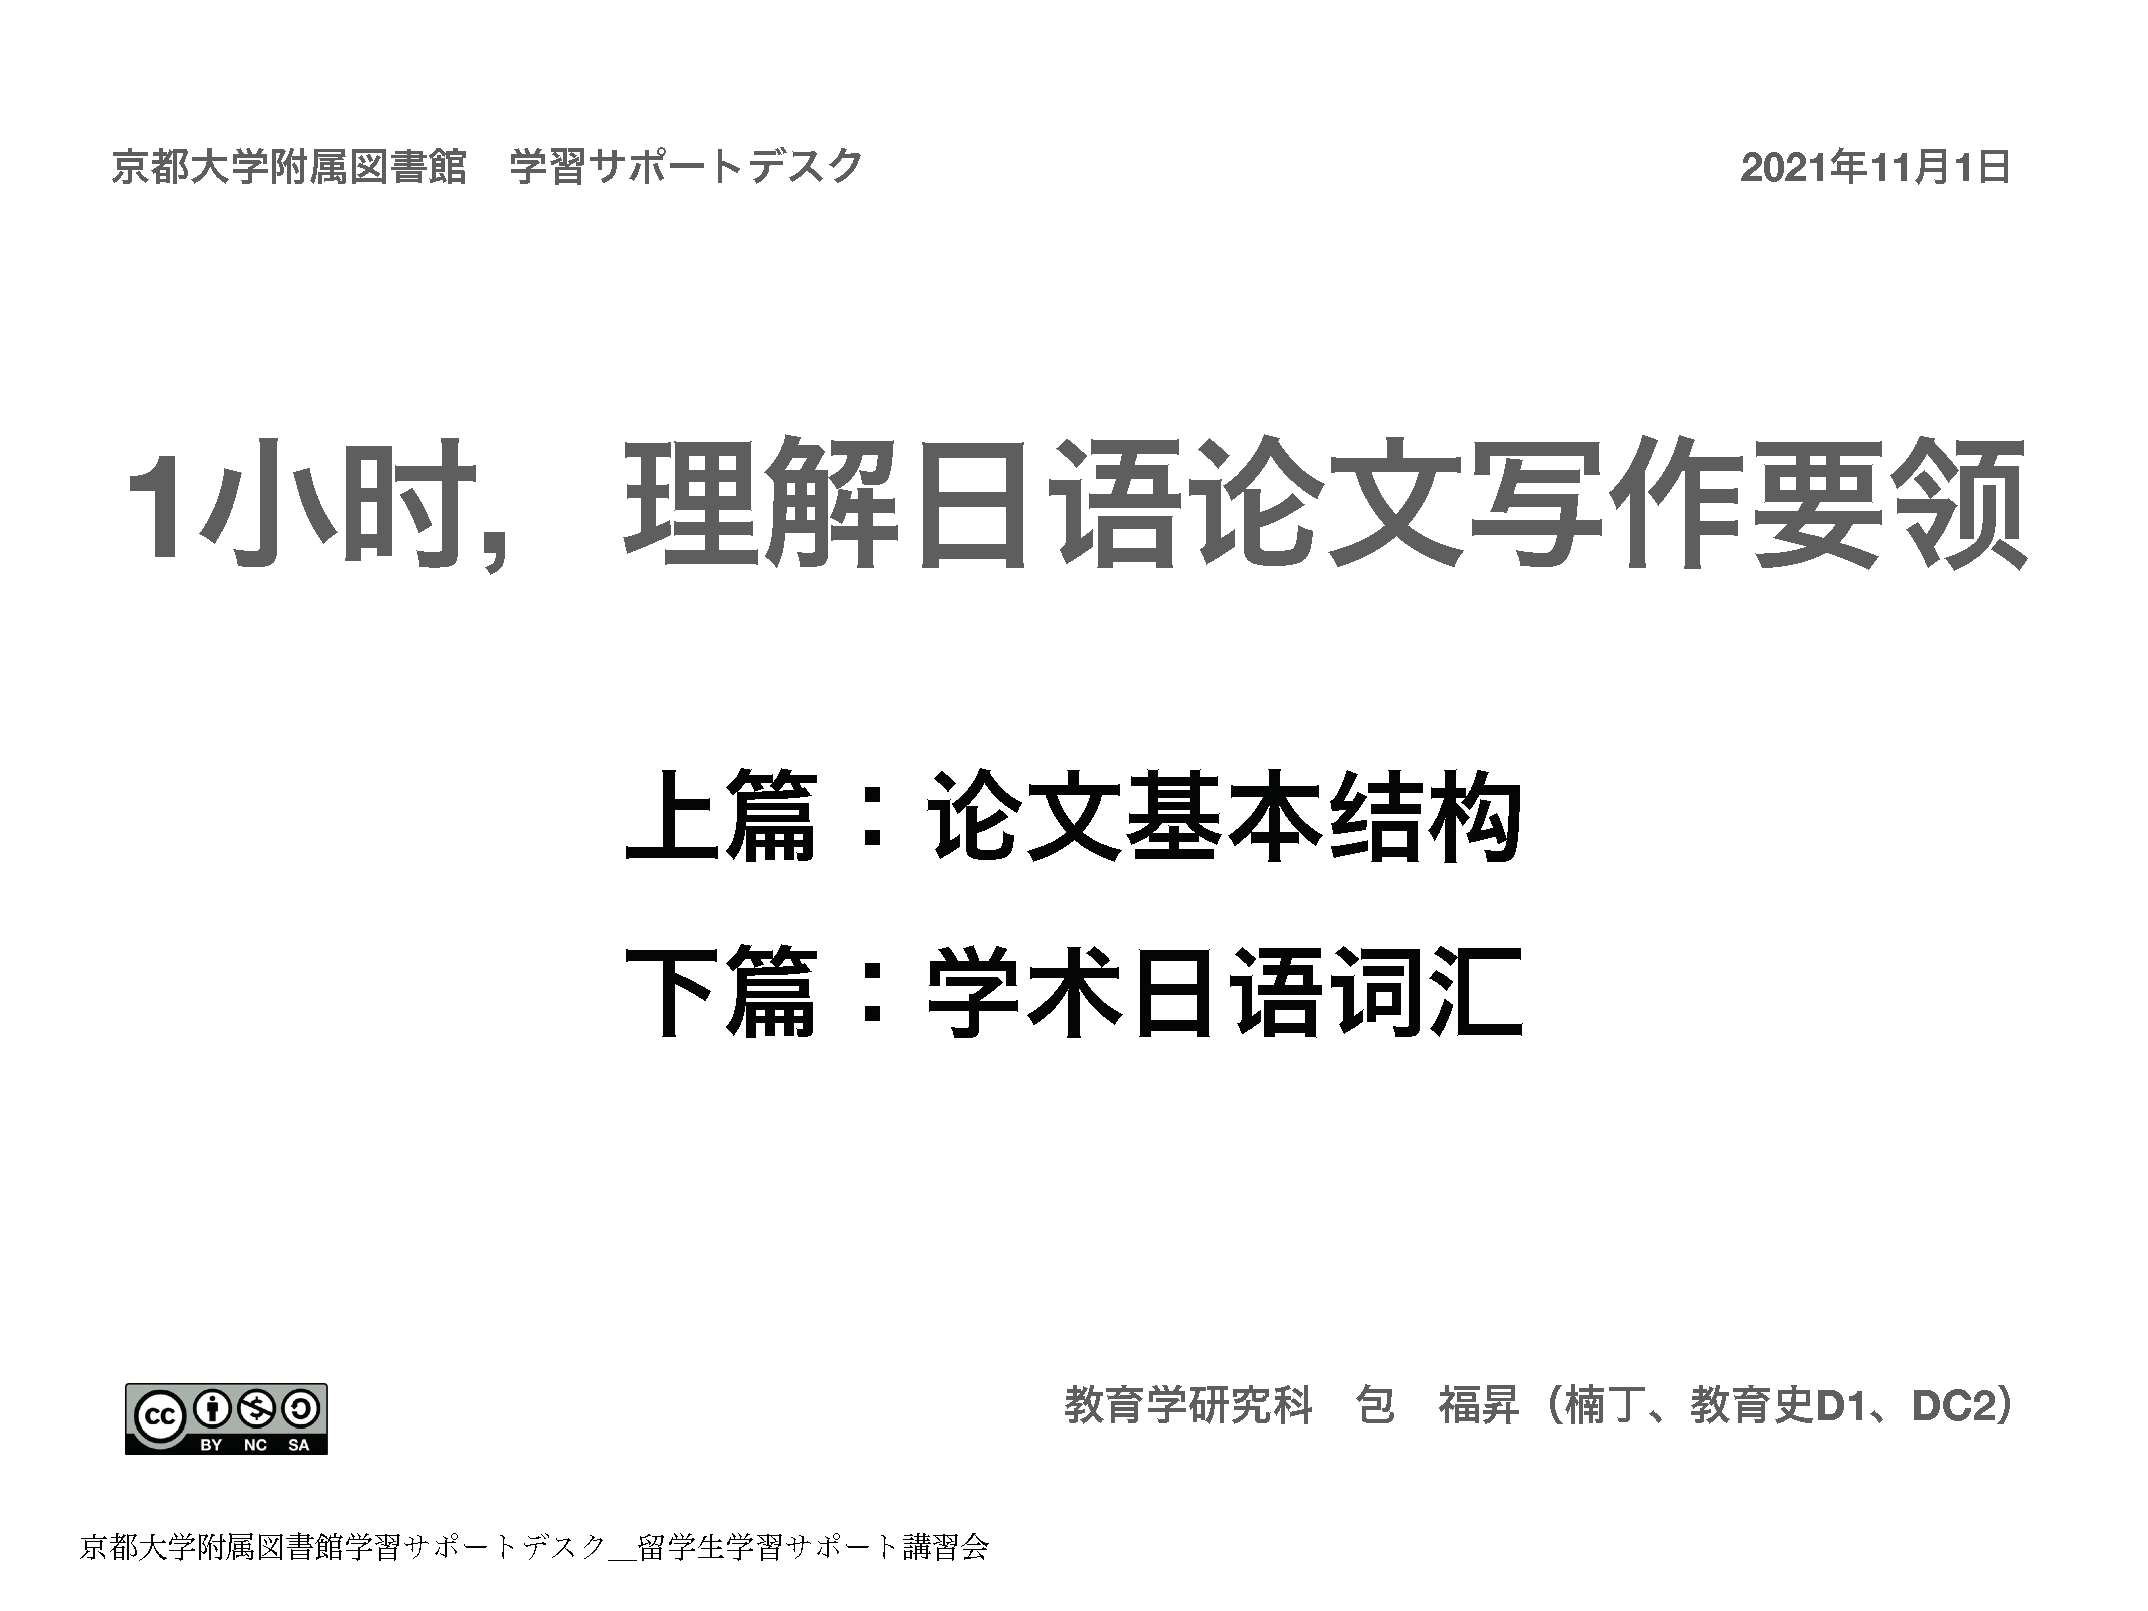 PDF　一小时，理解日语论文写作要领　上　（you can read this at library page on cyber learning space）